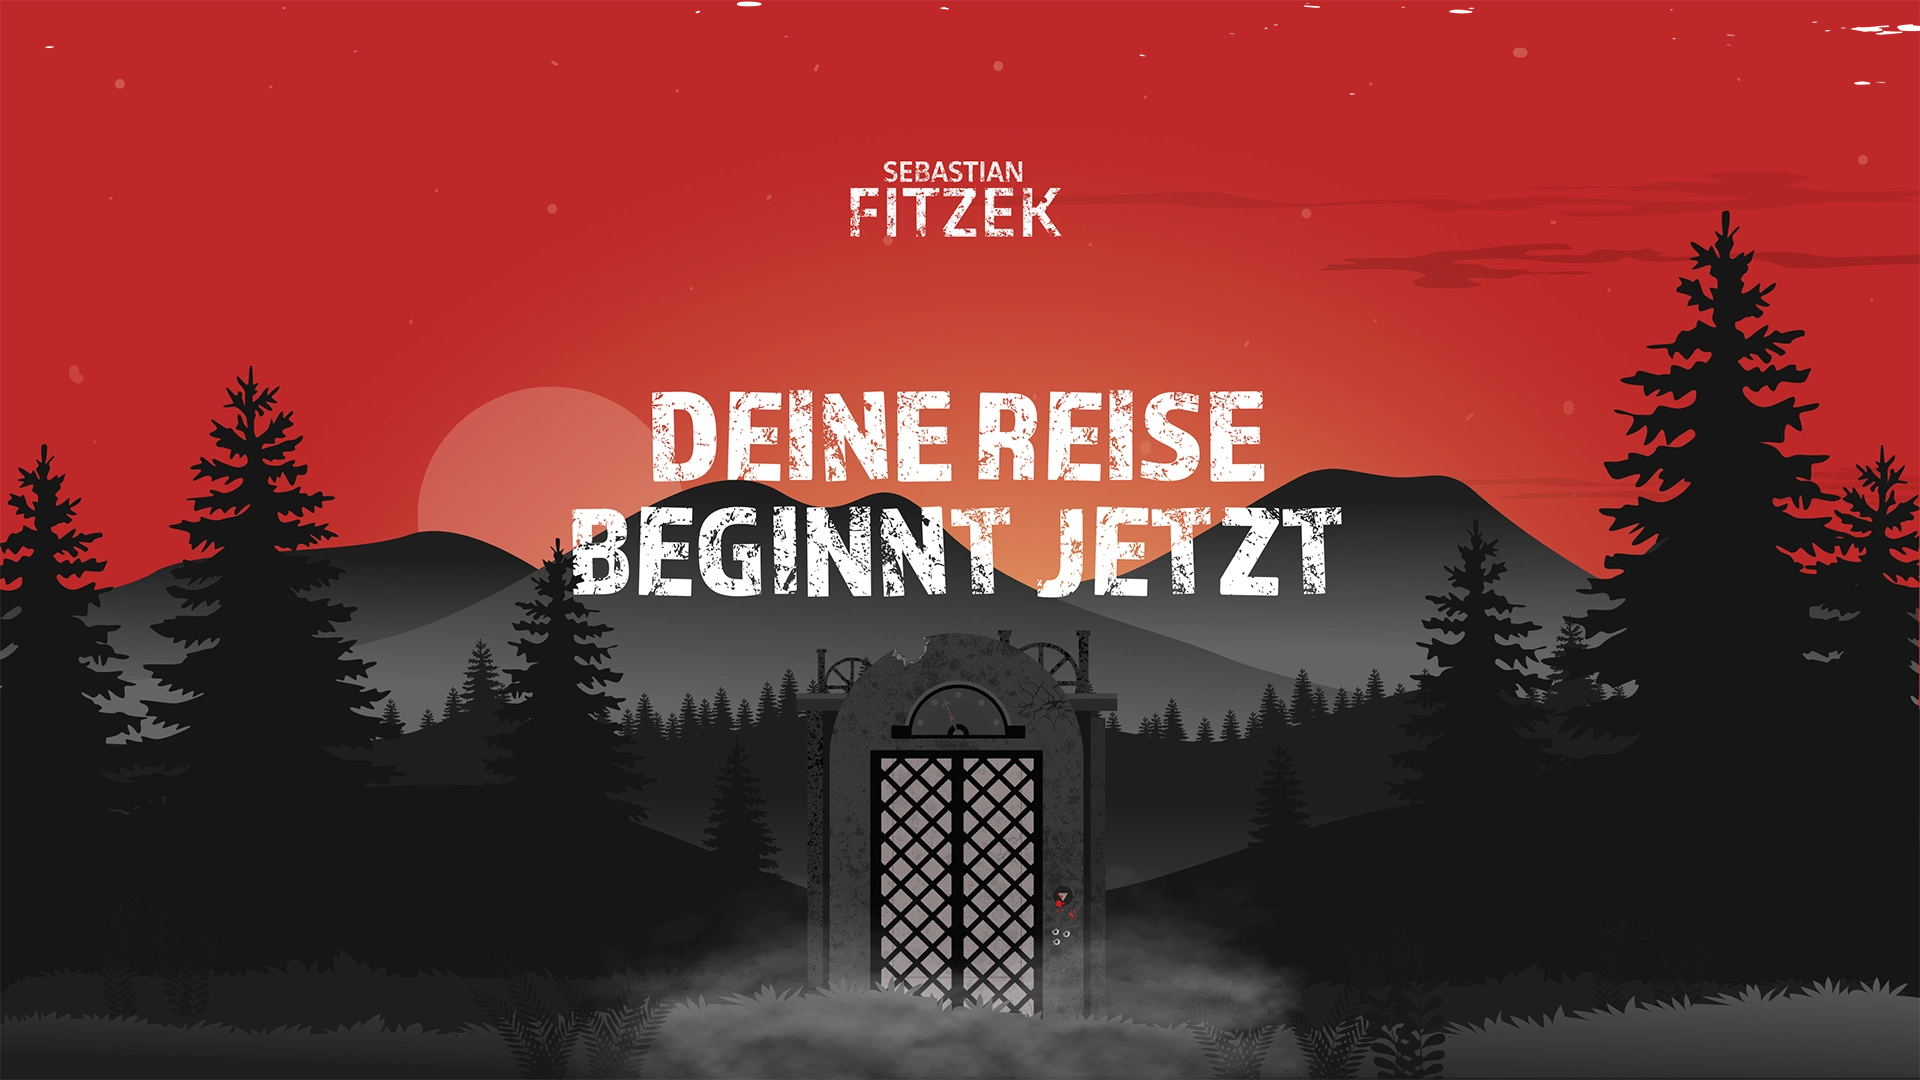 A picture shows the header of Sebastian Fitzek's website.